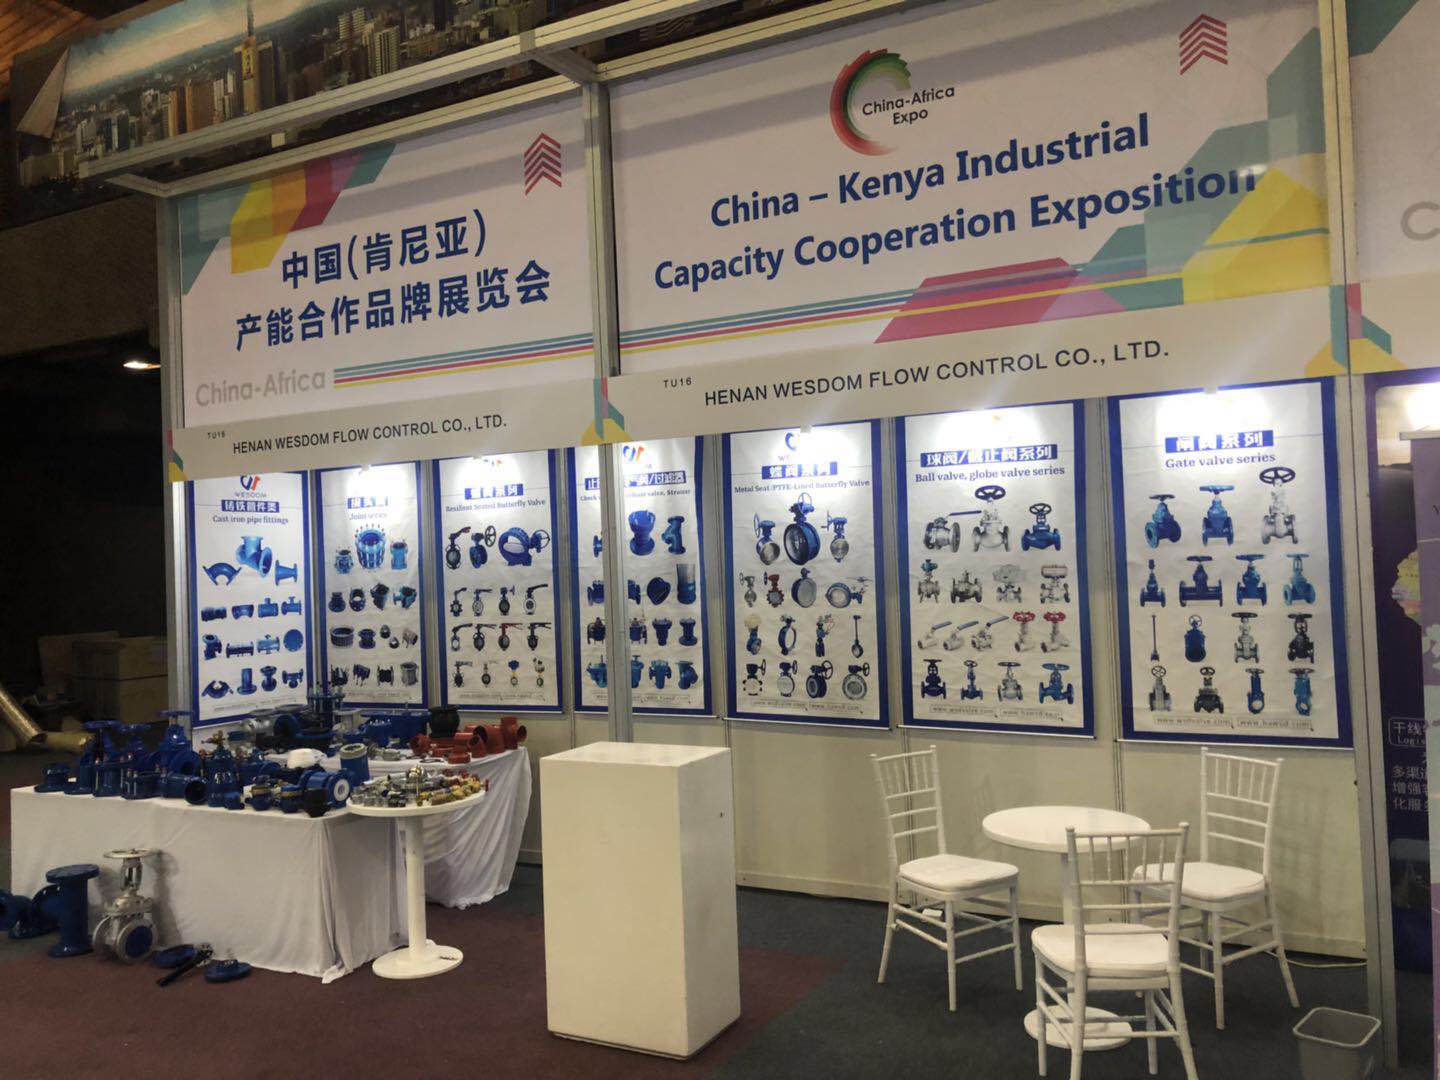 WESDOM Attend China-Kenya Industrial Capacity Cooperation Exposition